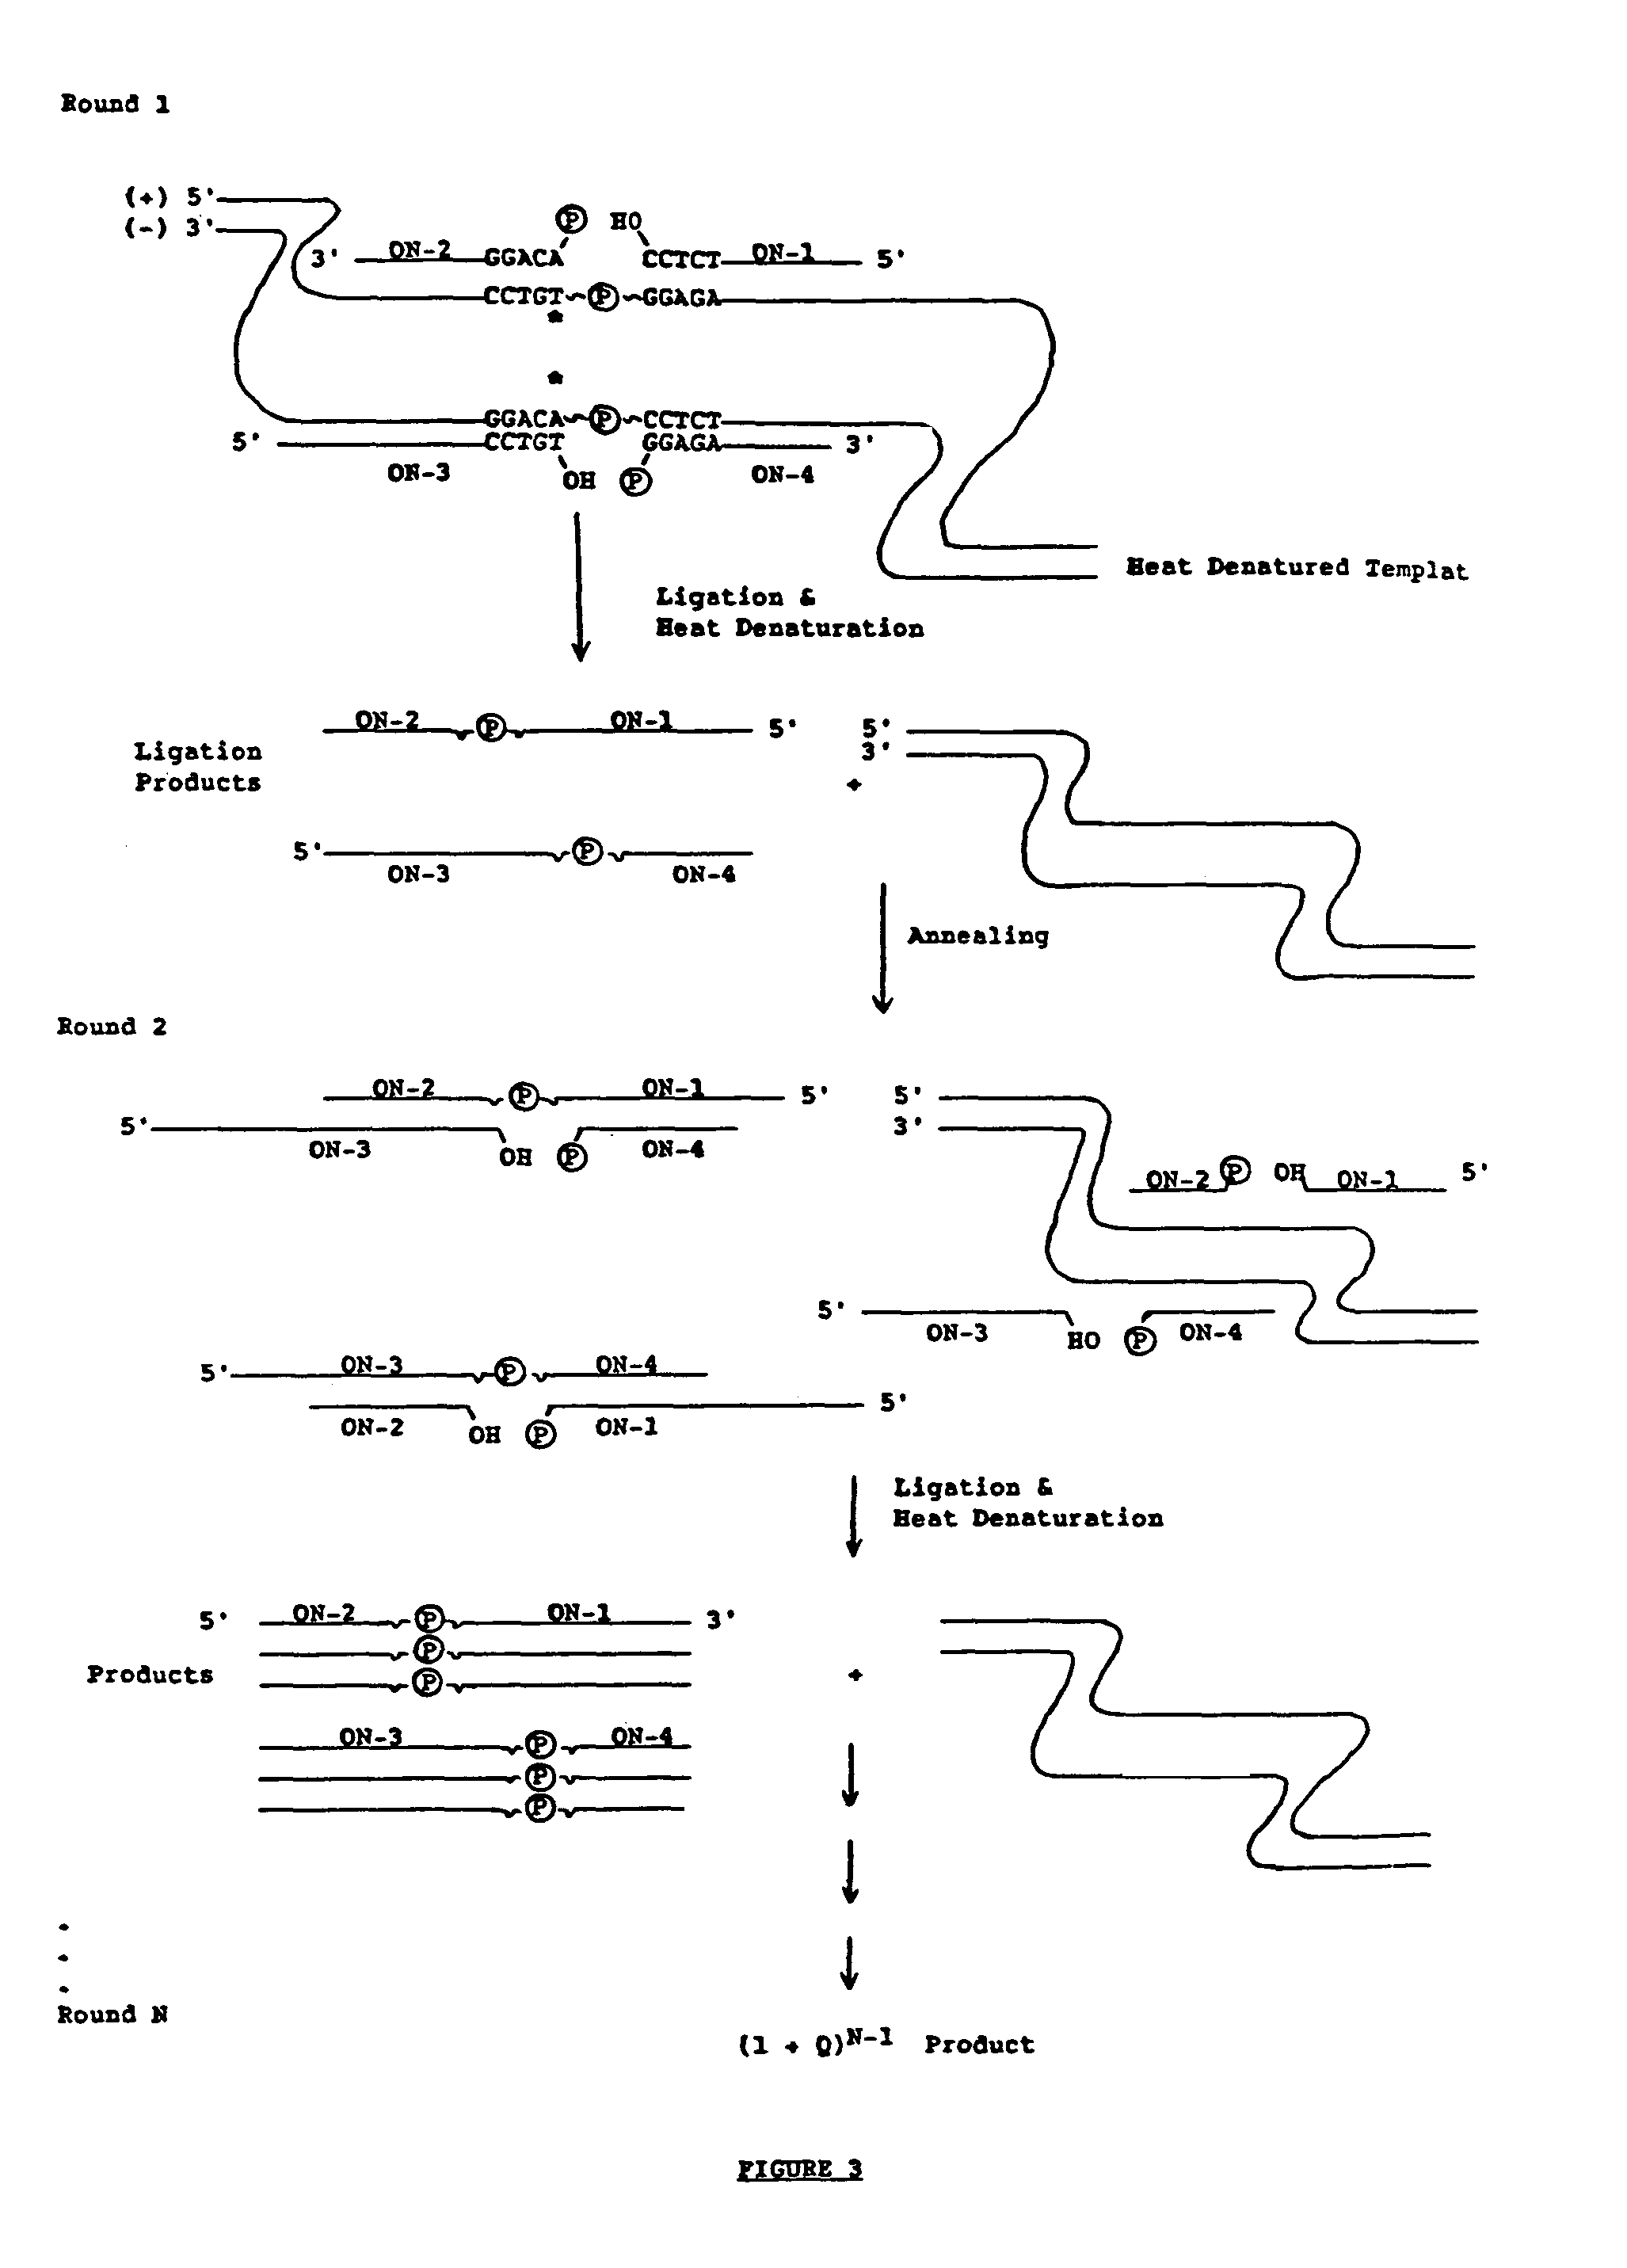 Ligation amplification of nucleic acid sequences